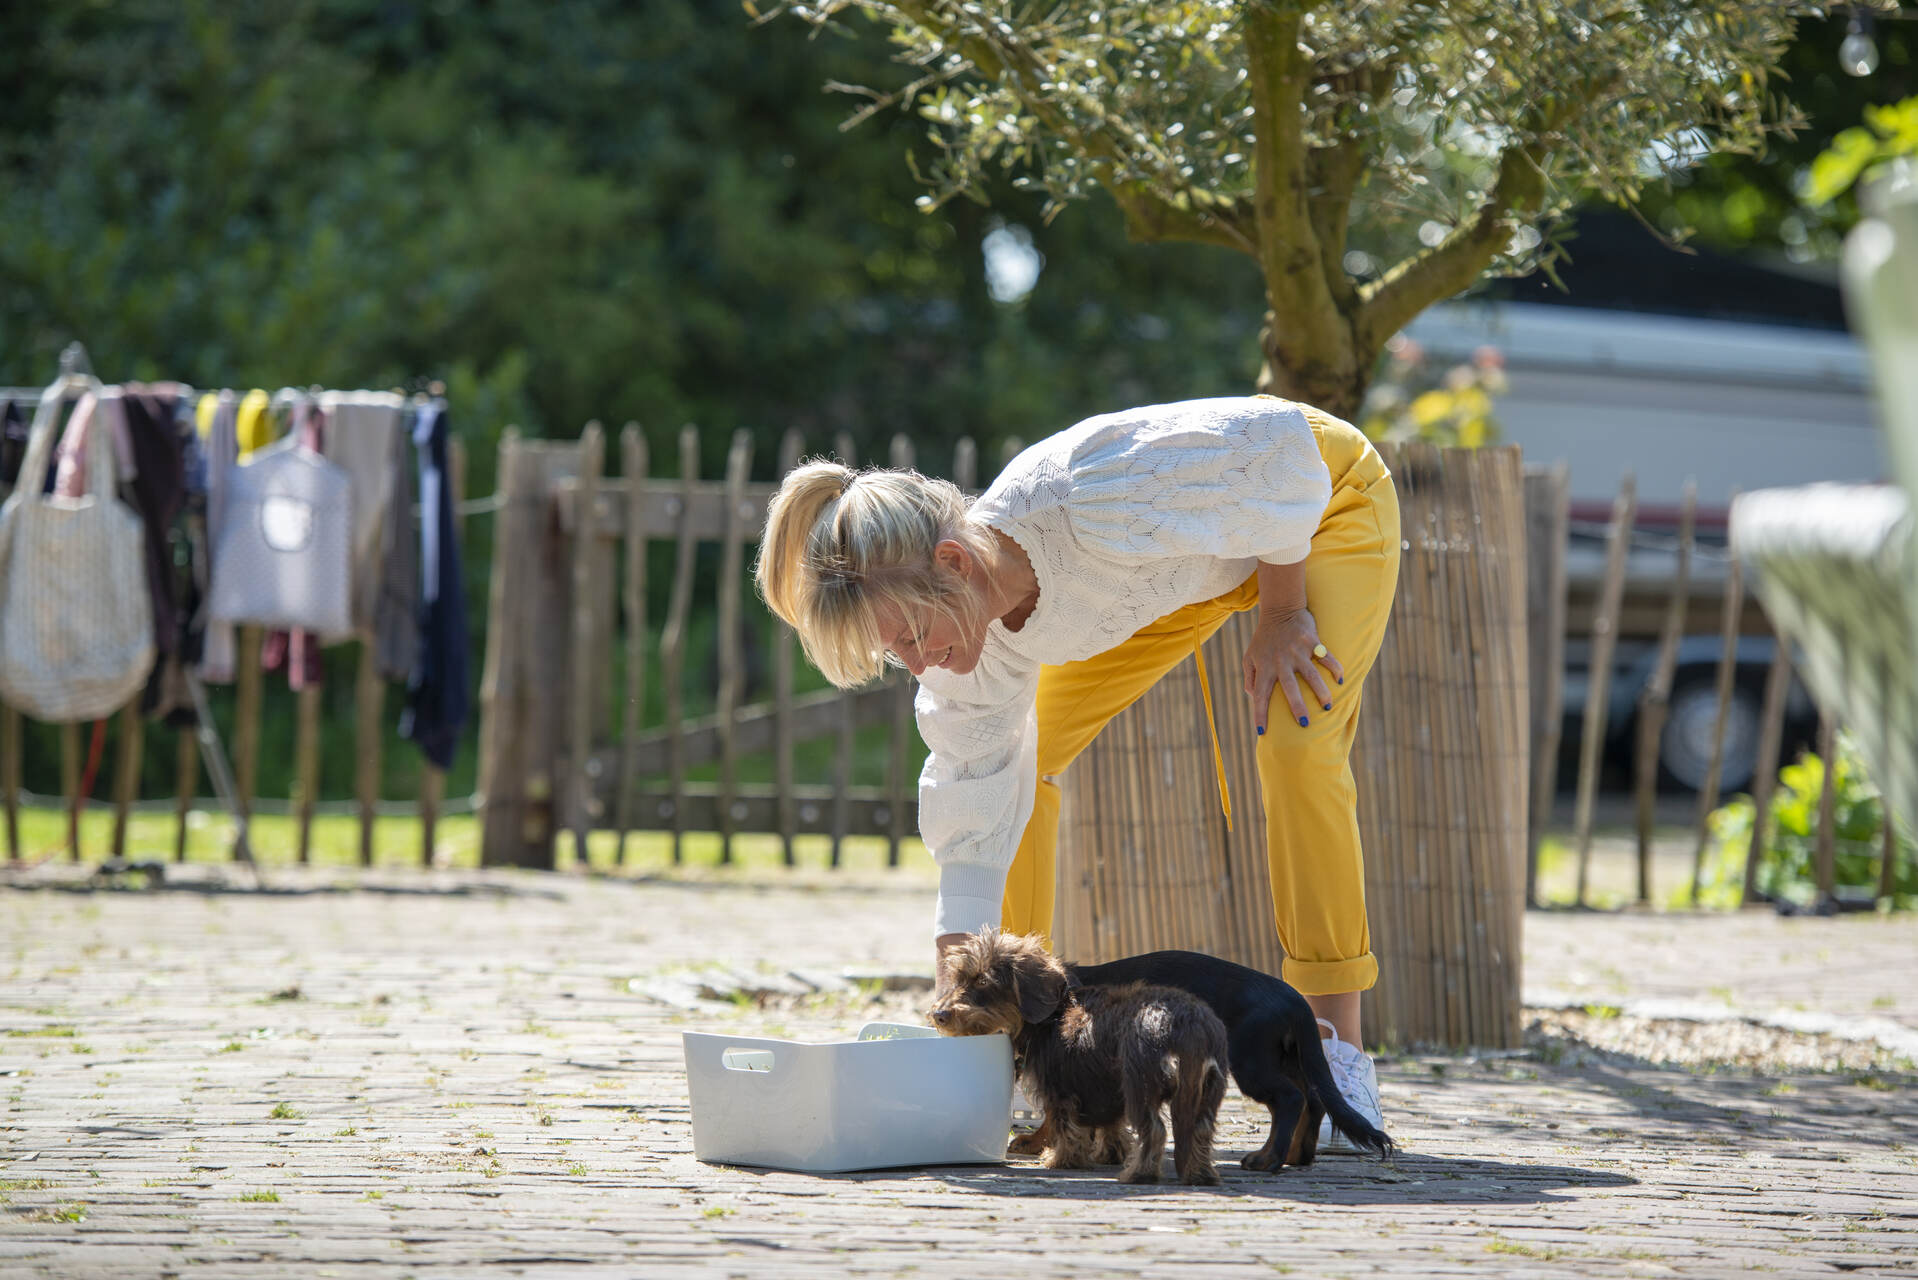 A woman training her puppy with a litter box outdoors